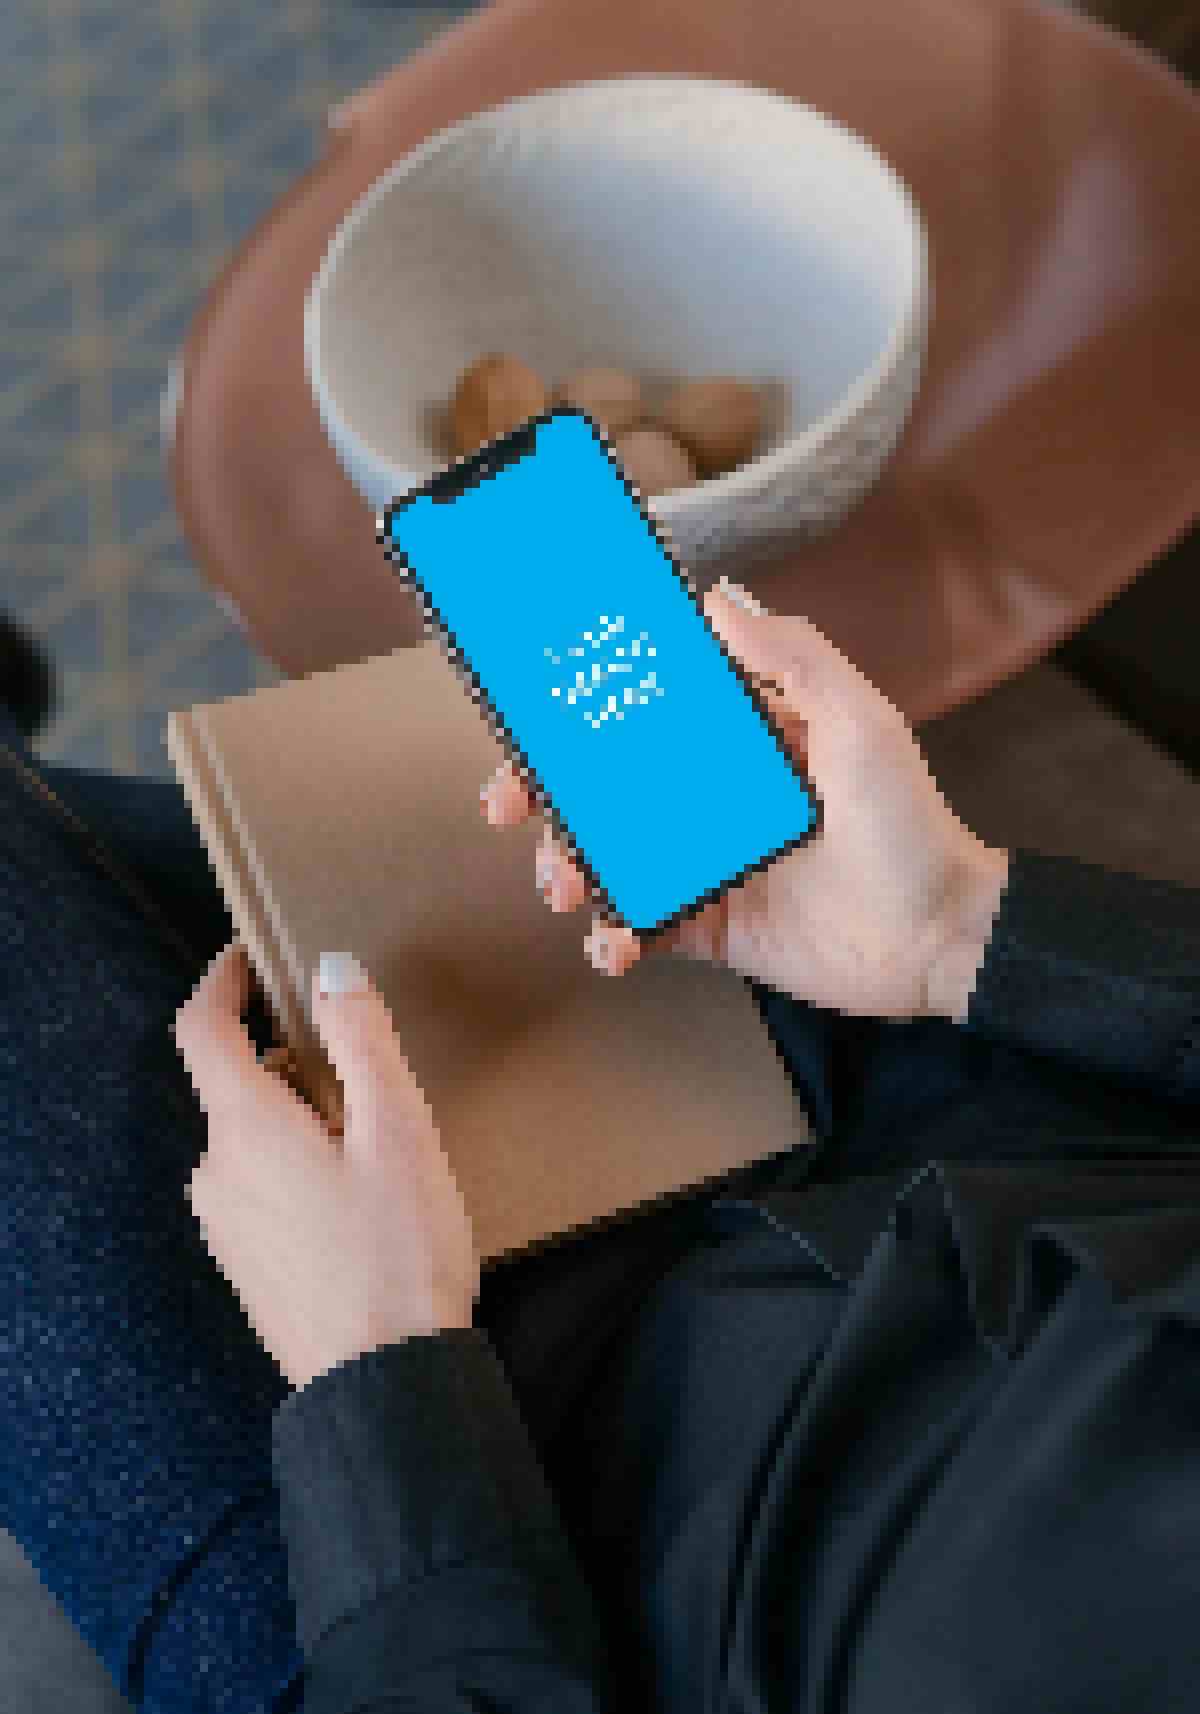 iPhone 11 and the book in the hand of a woman